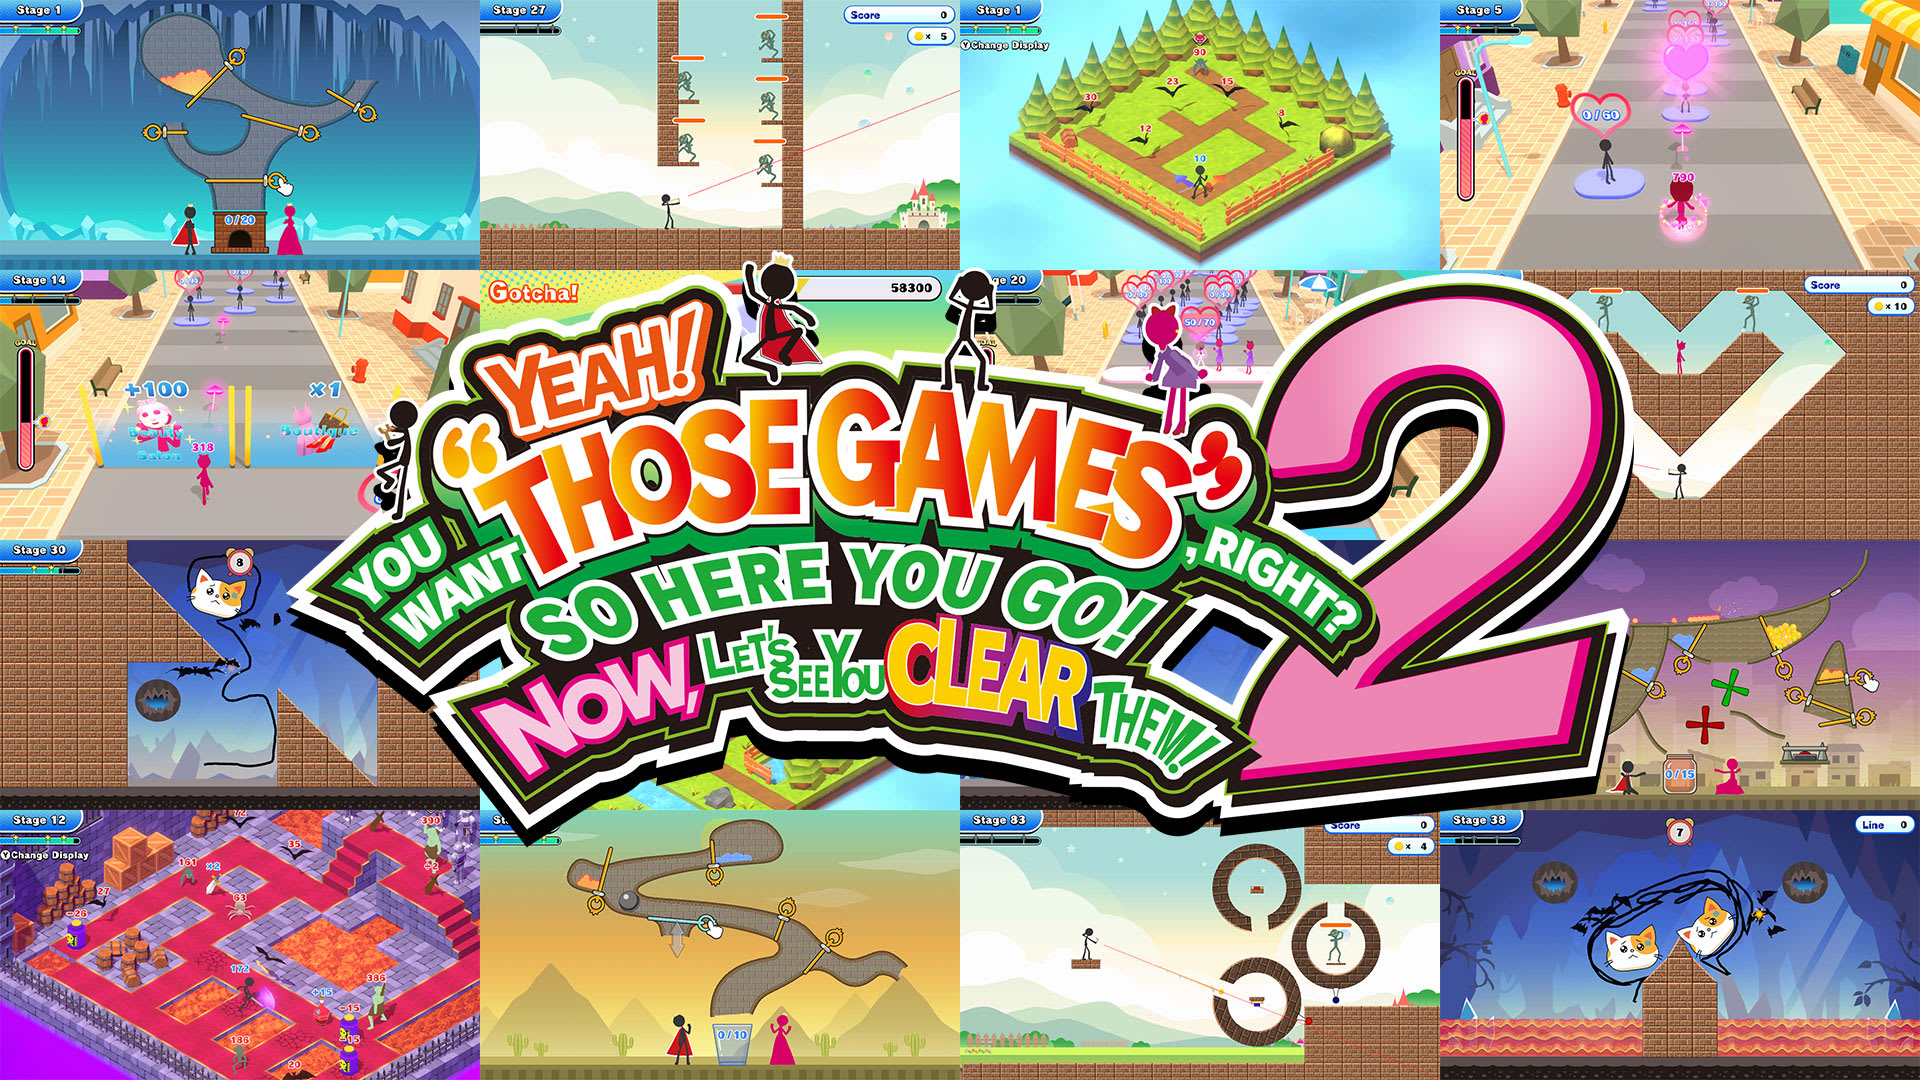 YEAH! YOU WANT "THOSE GAMES," RIGHT? SO HERE YOU GO! NOW, LET'S SEE YOU CLEAR THEM! 2 1